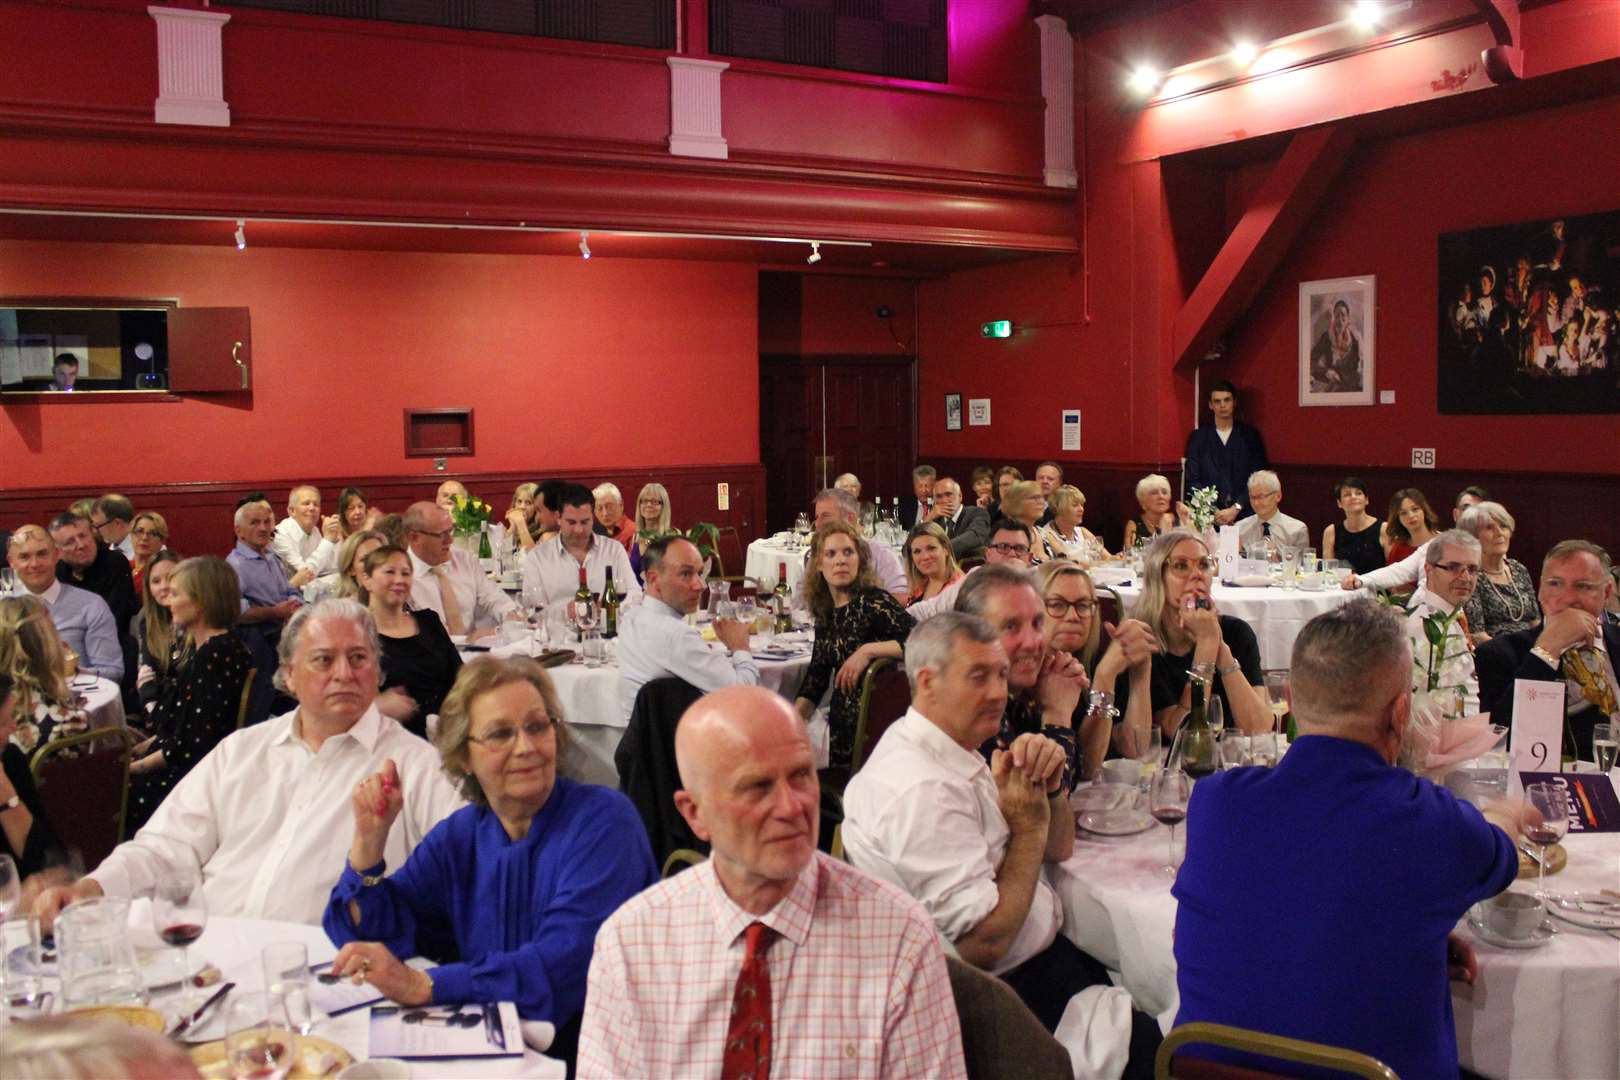 The auction of promises included a four course meal by The Dining Club at the Astor Theatre in aid of Cancer Research UK